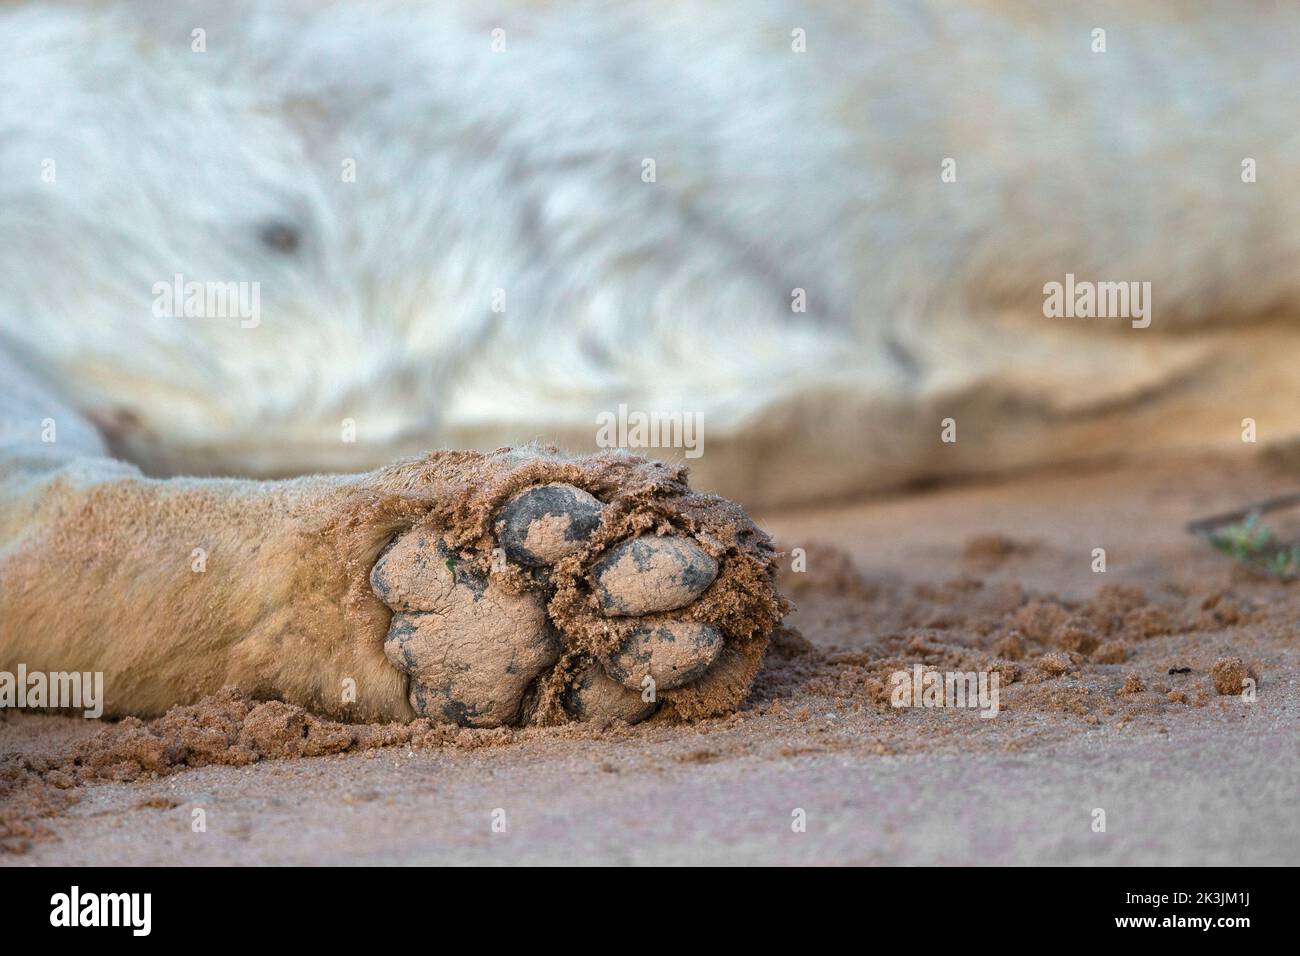 Lion (Panthera leo) paw, Kgalagadi transfrontier park, Northern Cape, South Africa Stock Photo